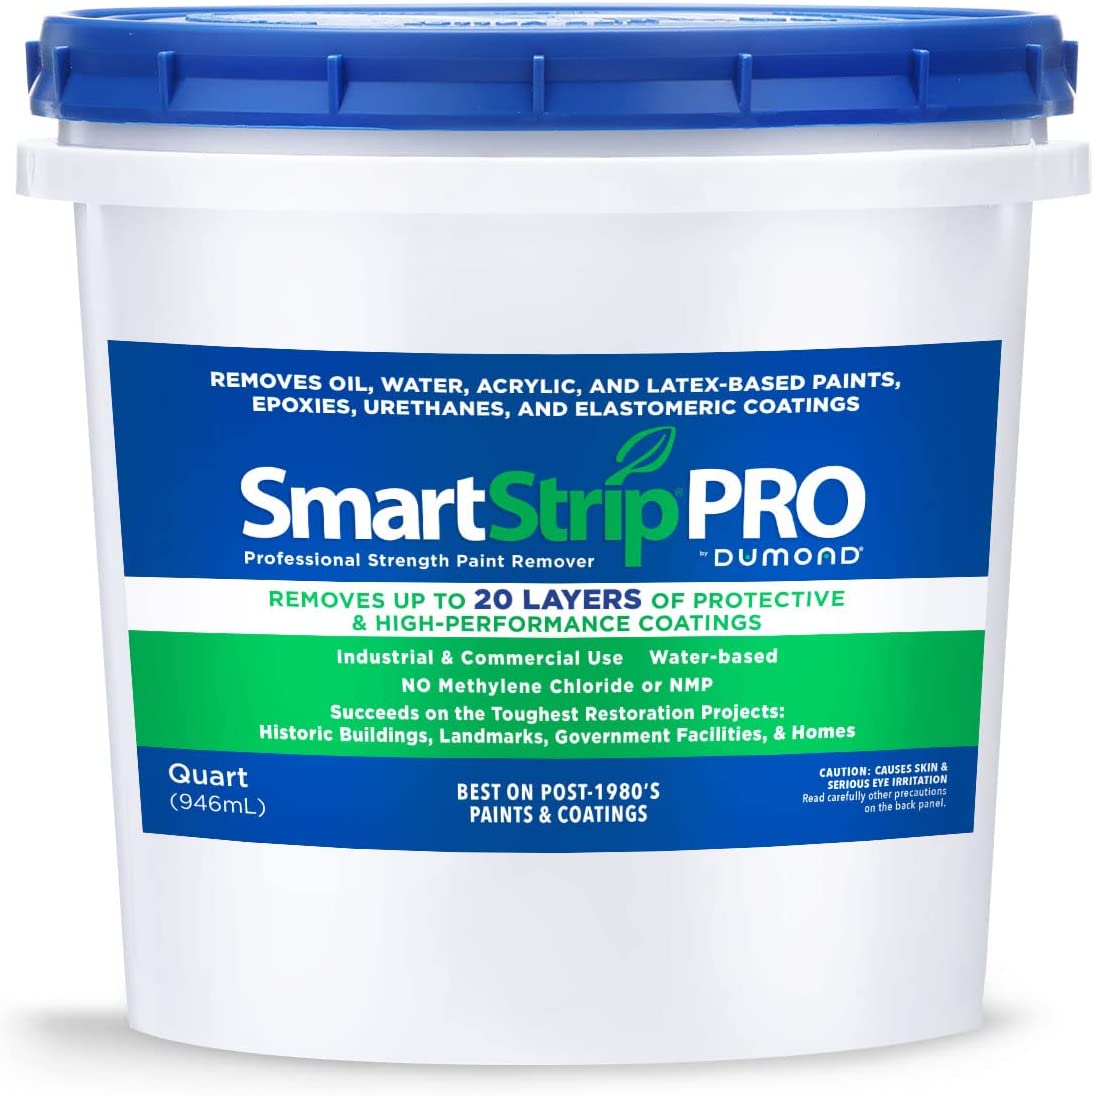 Smart Strip PRO Paint Remover - Professional Strength [...]